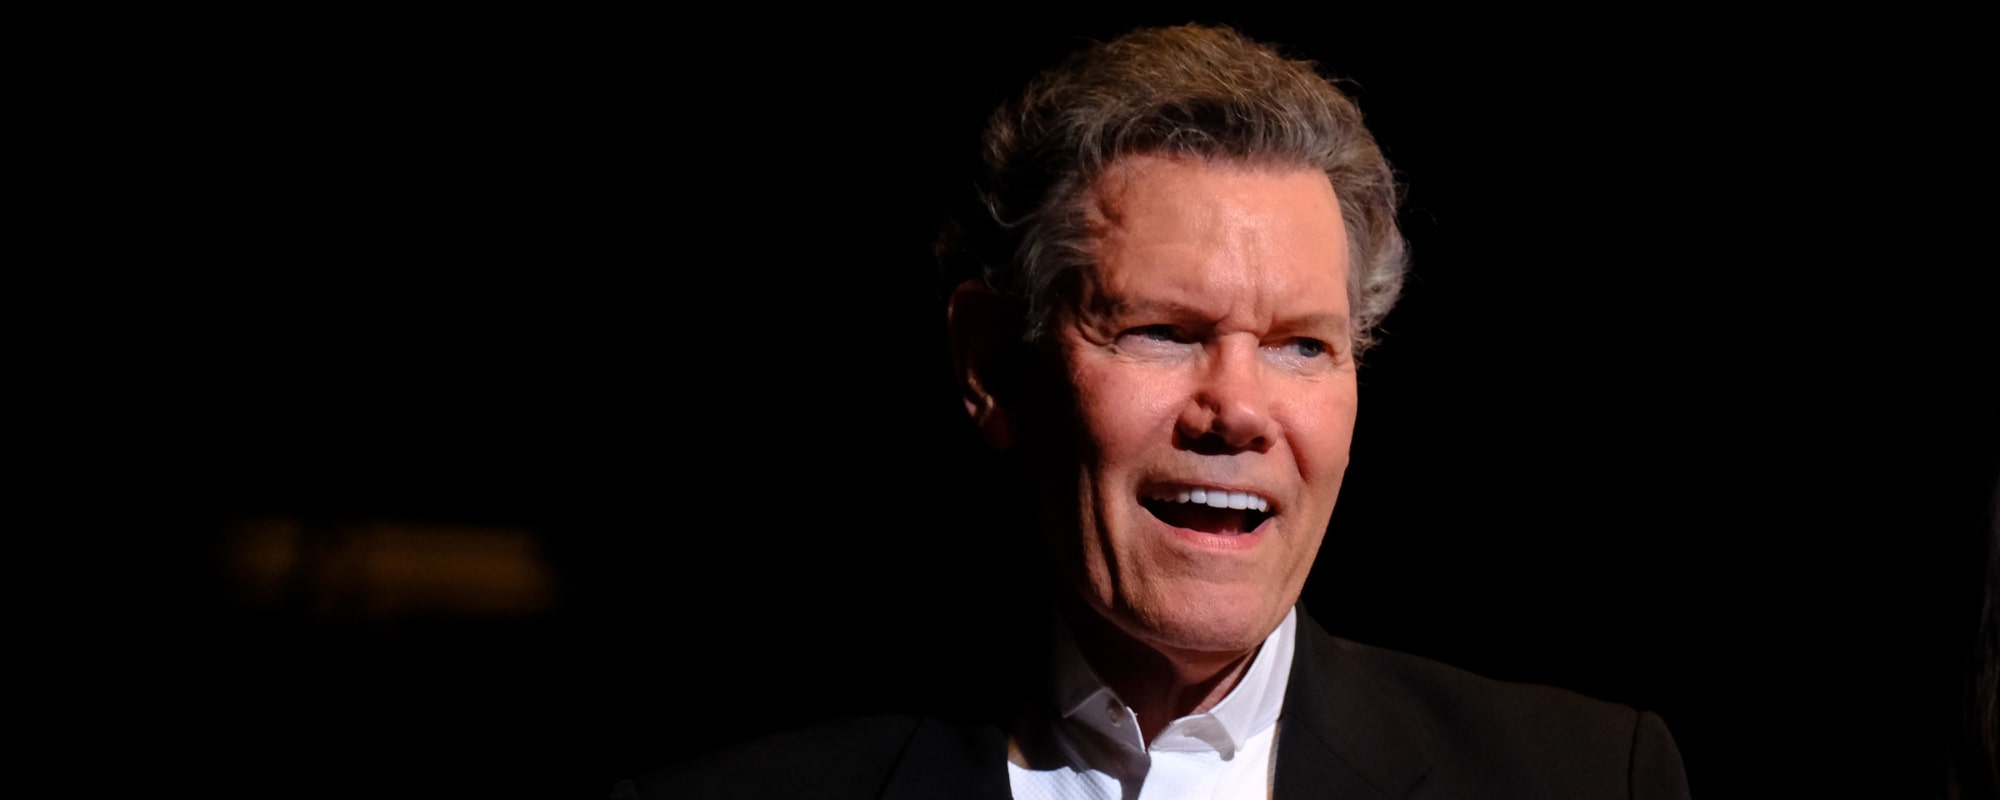 Randy Travis Is Officially “Back in the Saddle” with Brand-New Song “Where That Came From”